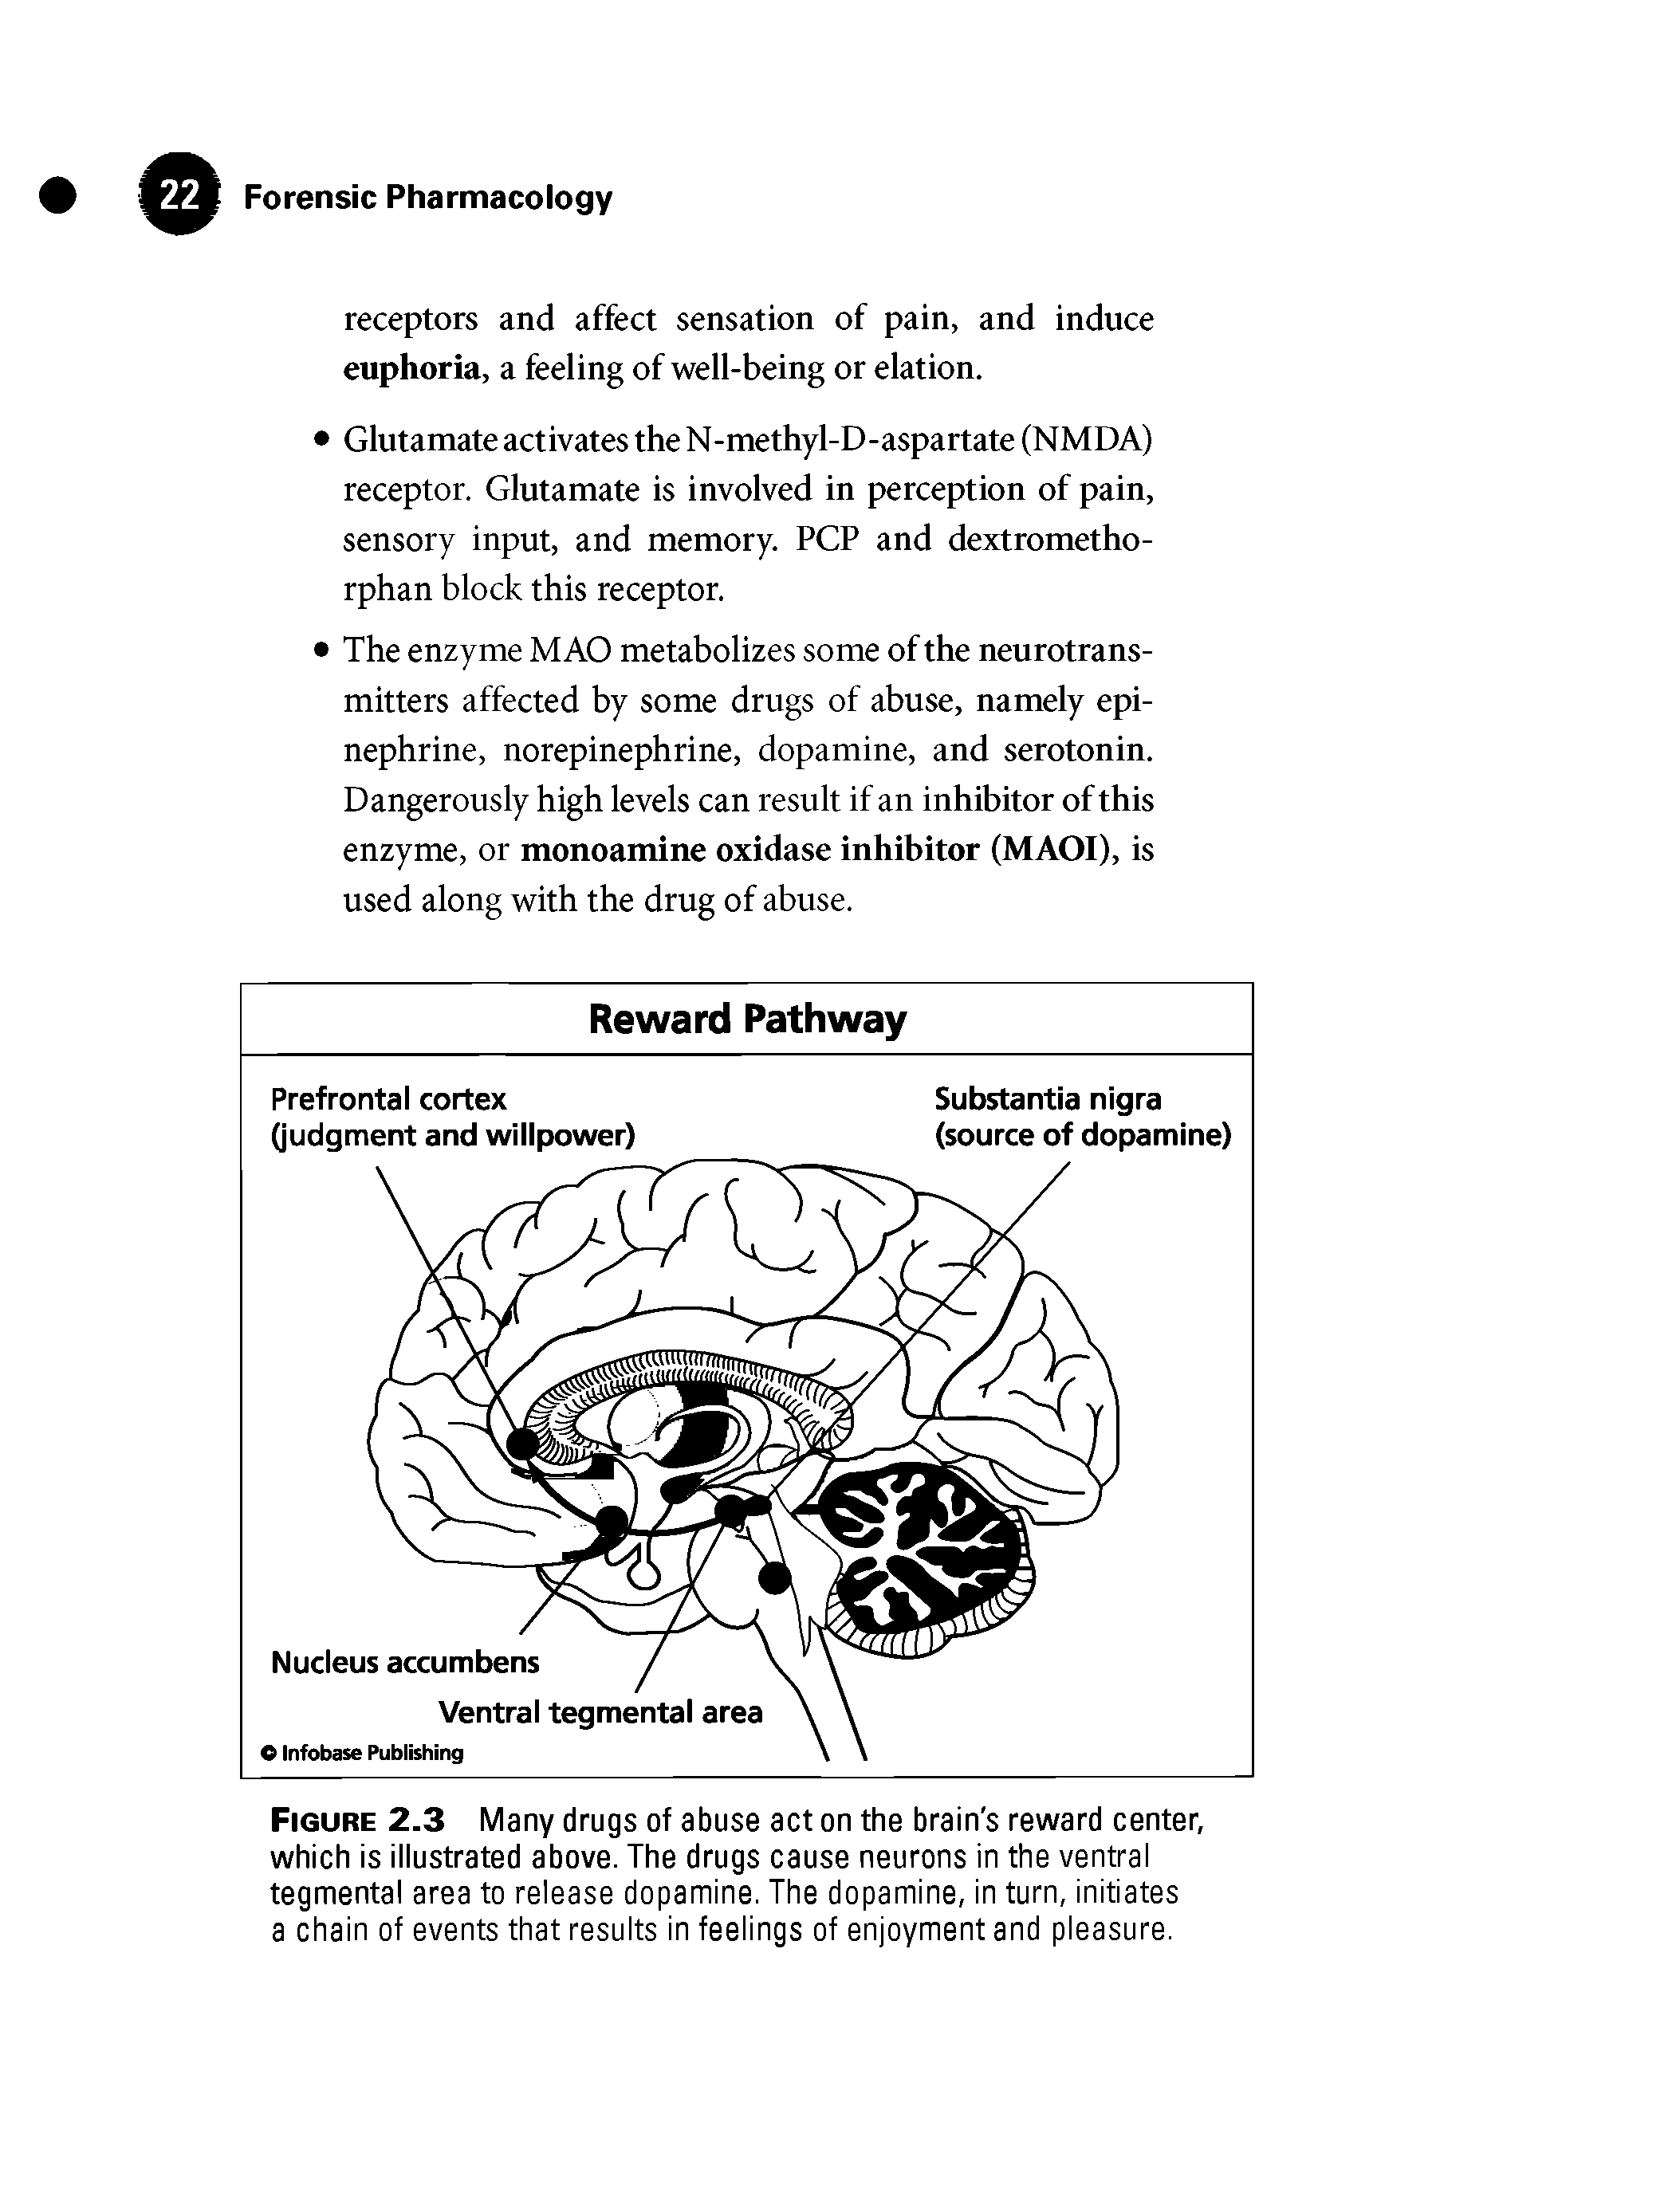 Figure 2.3 Many drugs of abuse act on the brain s reward center, which is illustrated above. The drugs cause neurons in the ventral tegmental area to release dopamine. The dopamine, in turn, initiates a chain of events that results in feelings of enjoyment and pleasure.